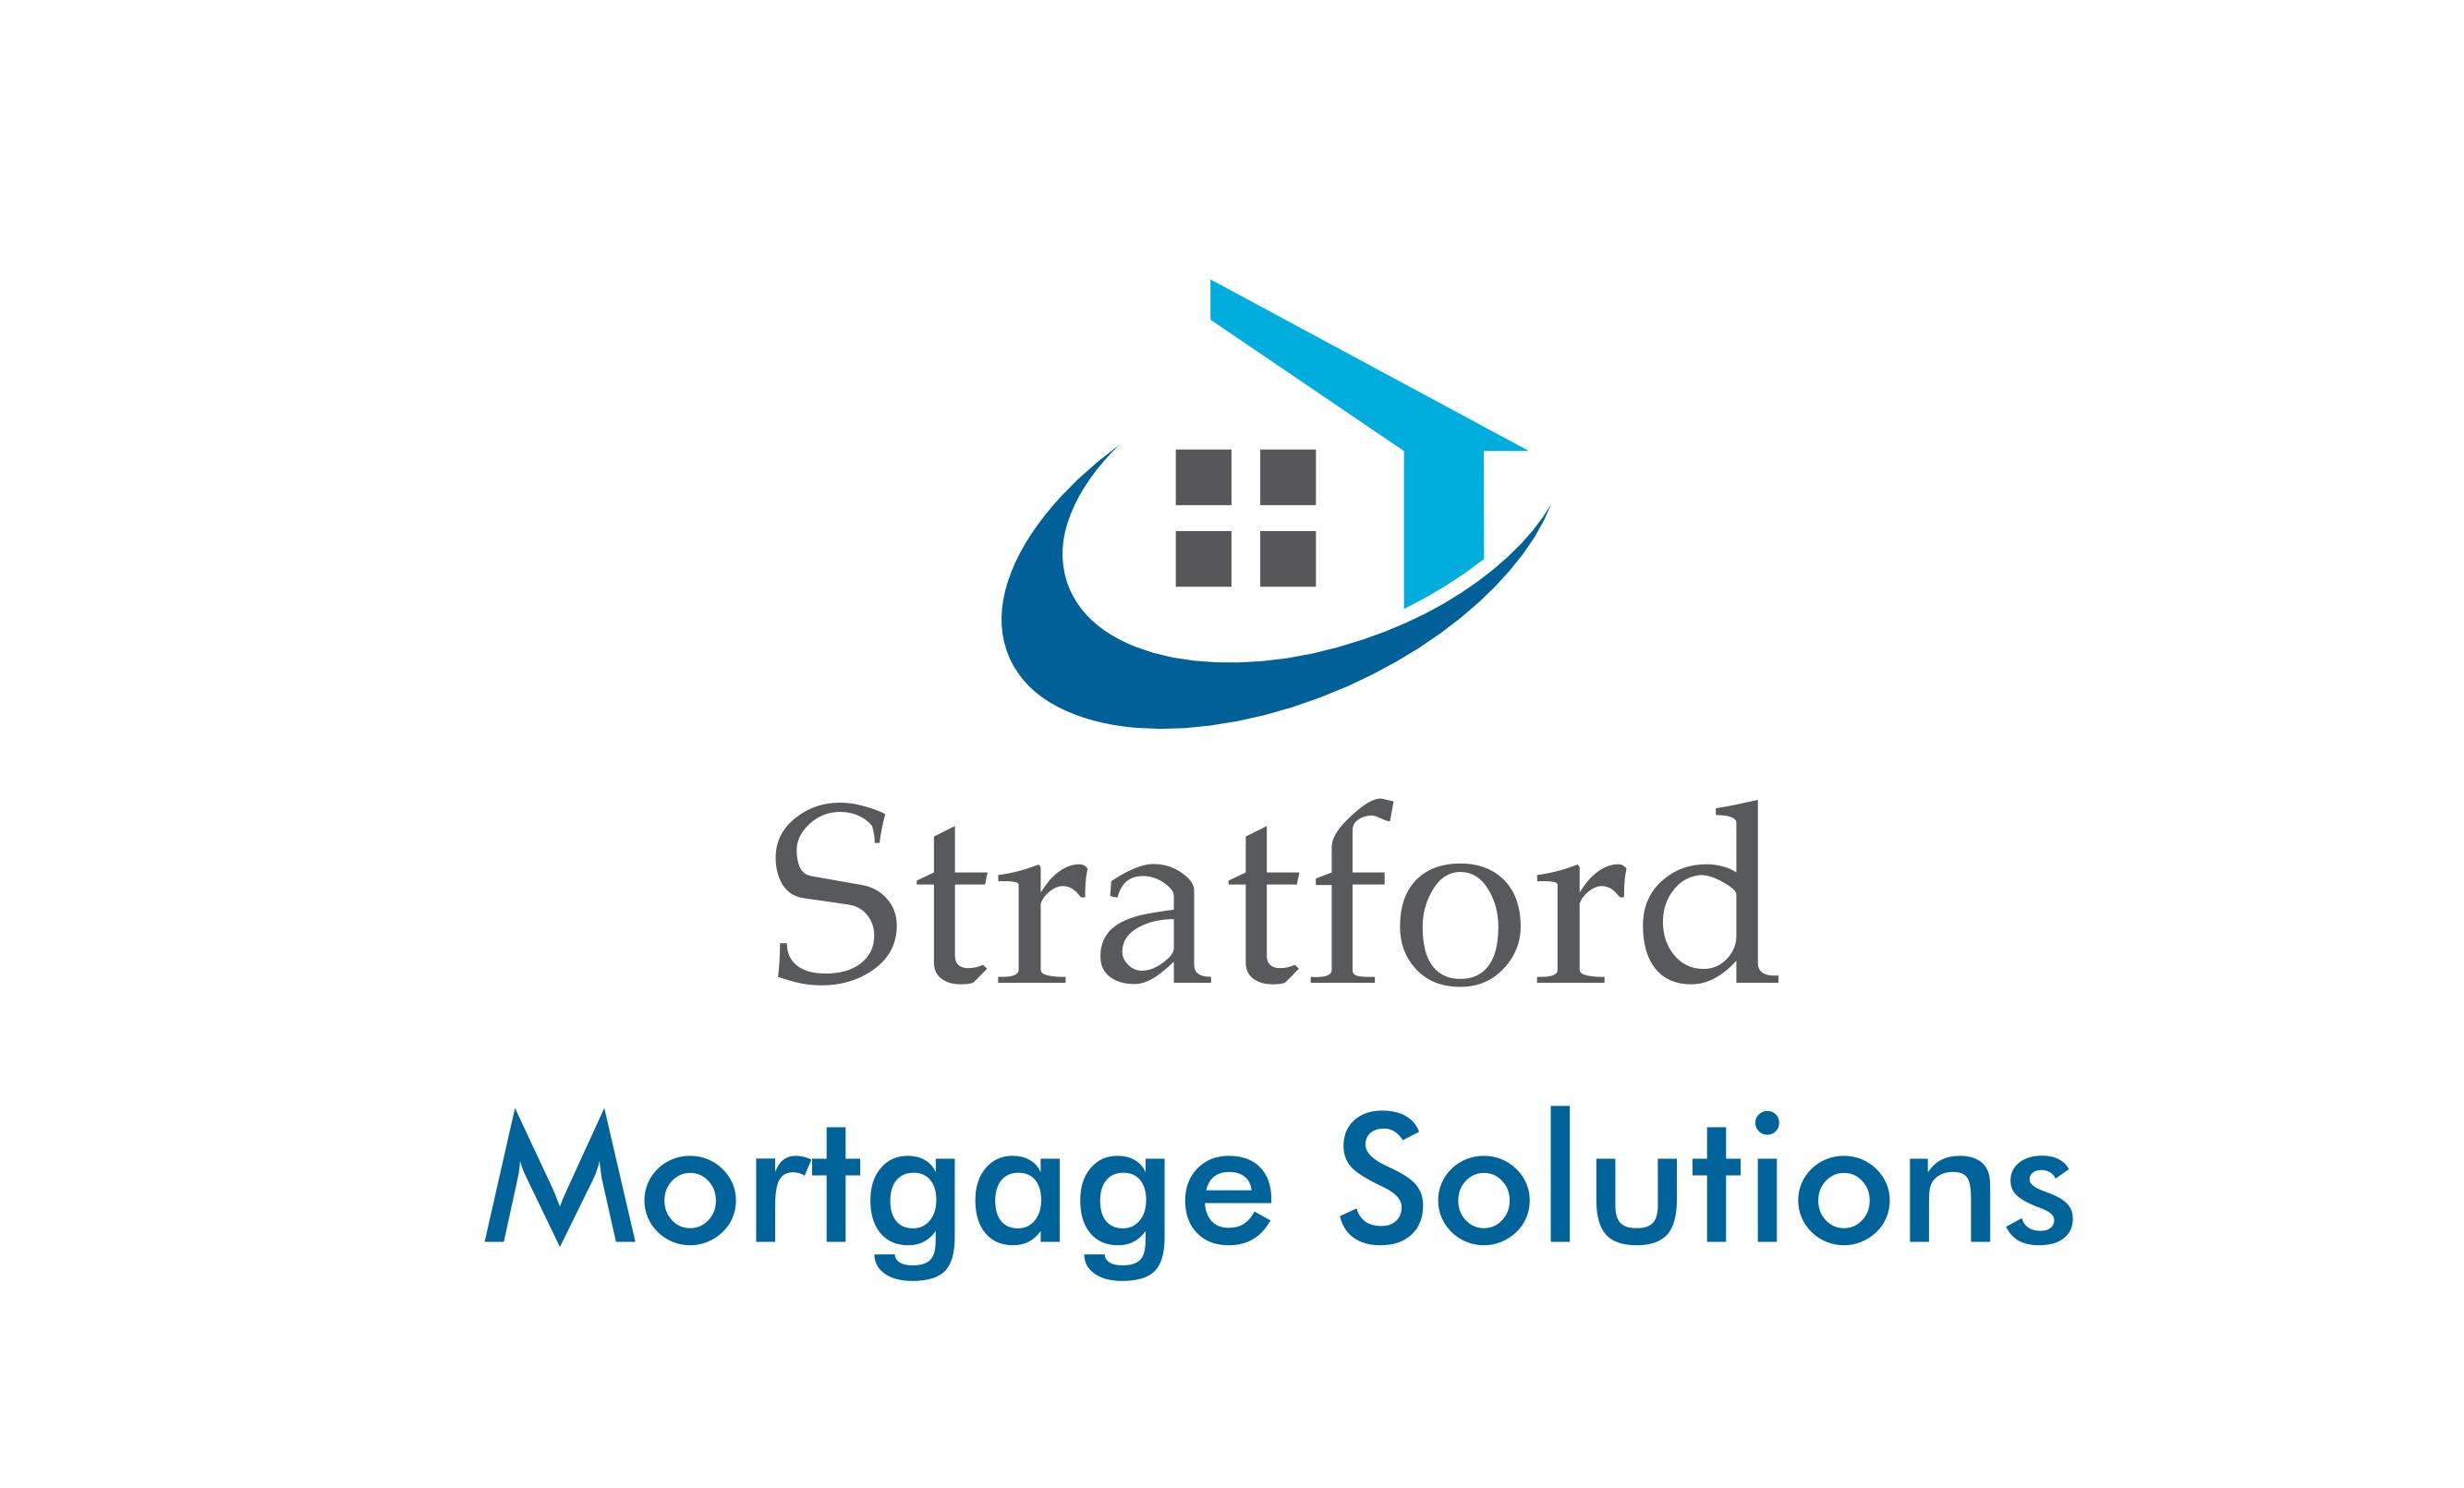 Stratford Mortgage Solutions 010